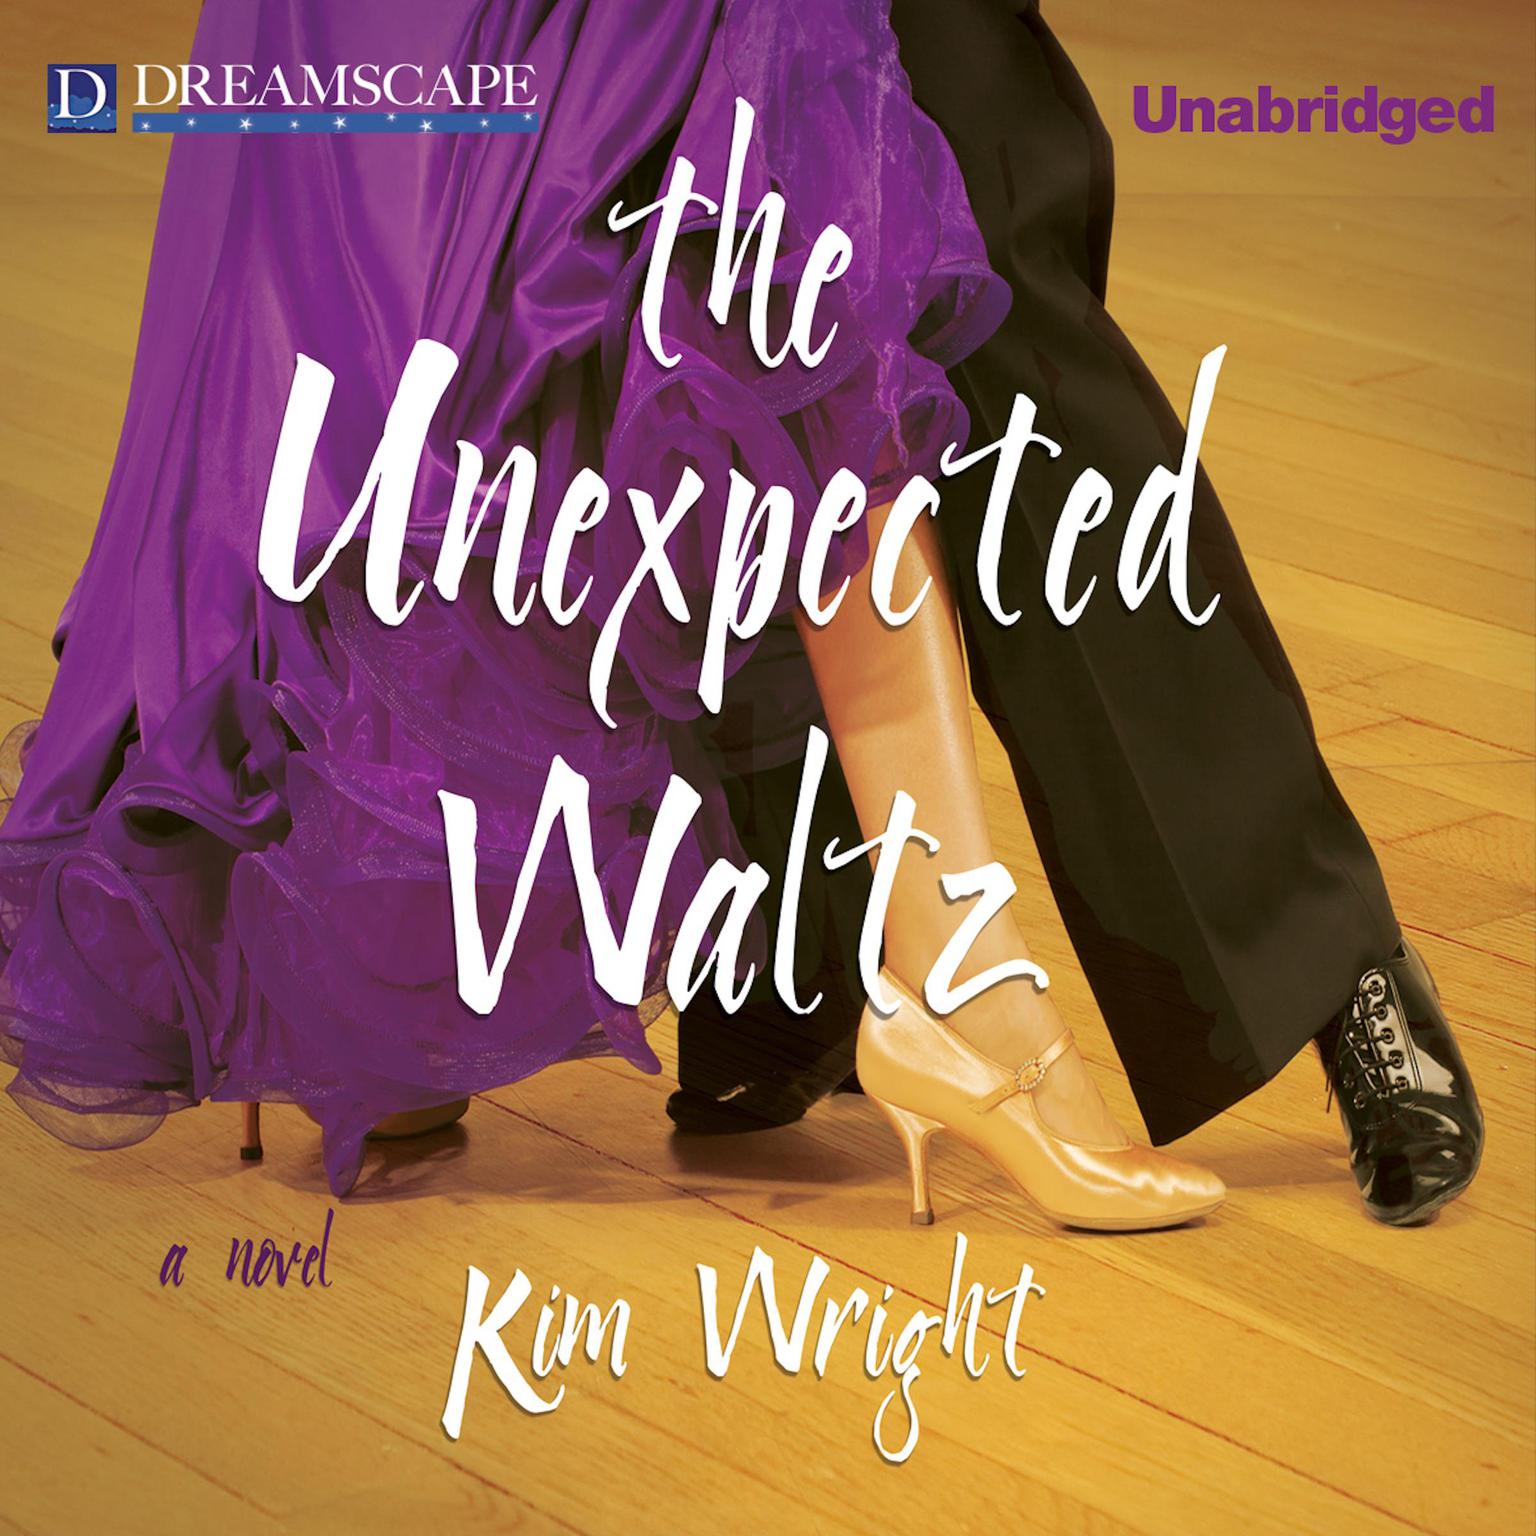 The Unexpected Waltz Audiobook, by Kim Wright